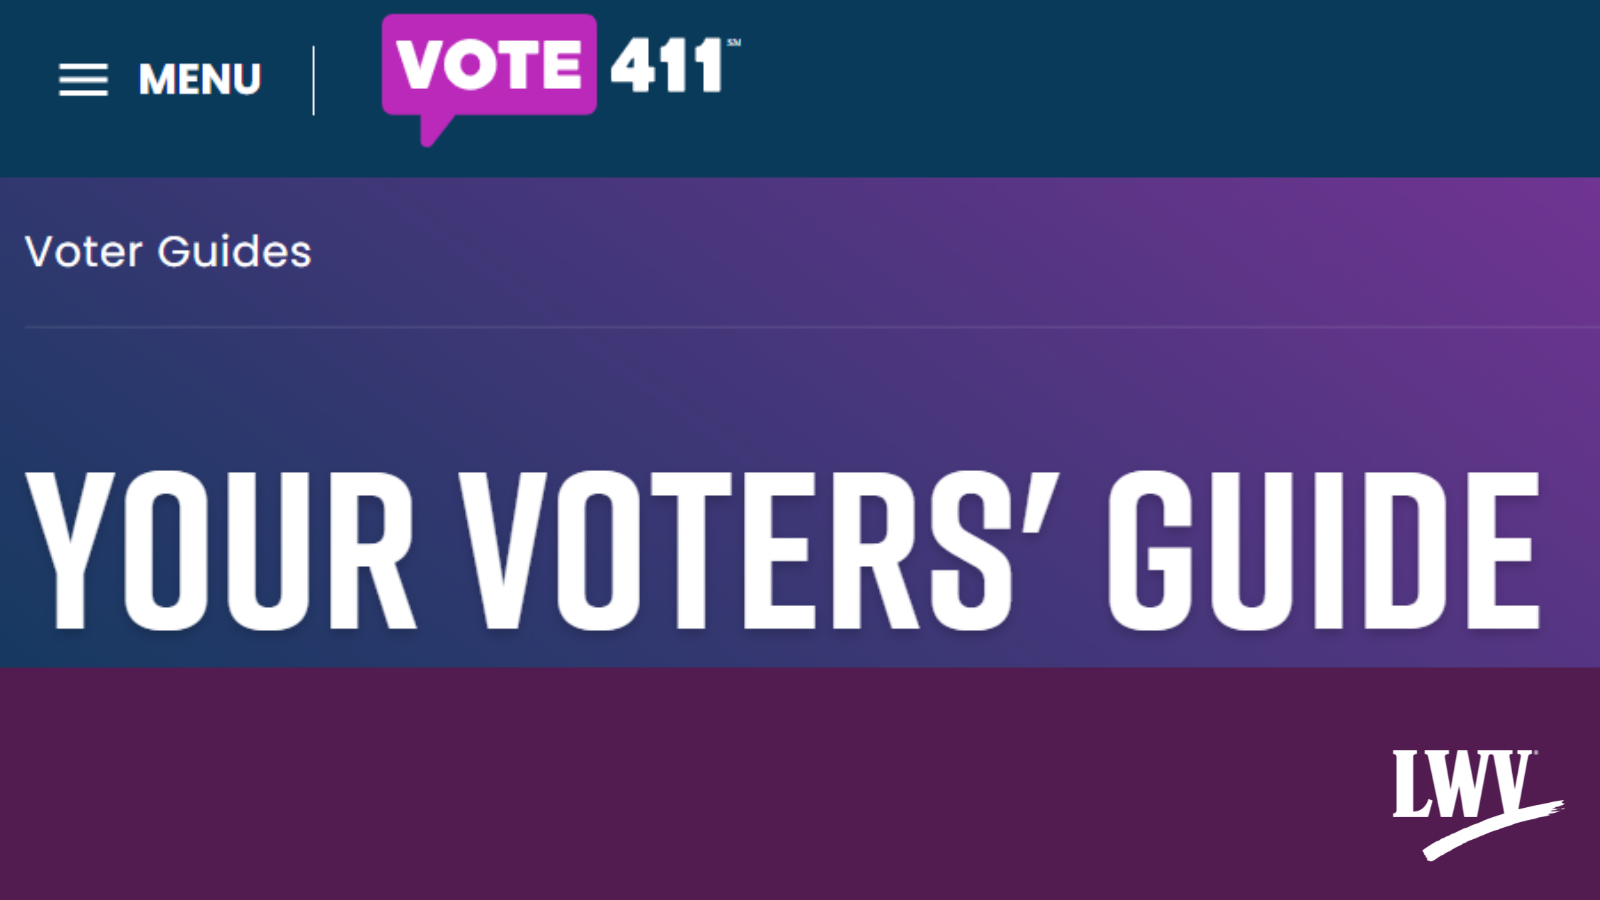 Screenshot of VOTE411.org showing the text "Your Voter's Guide" on a purple background